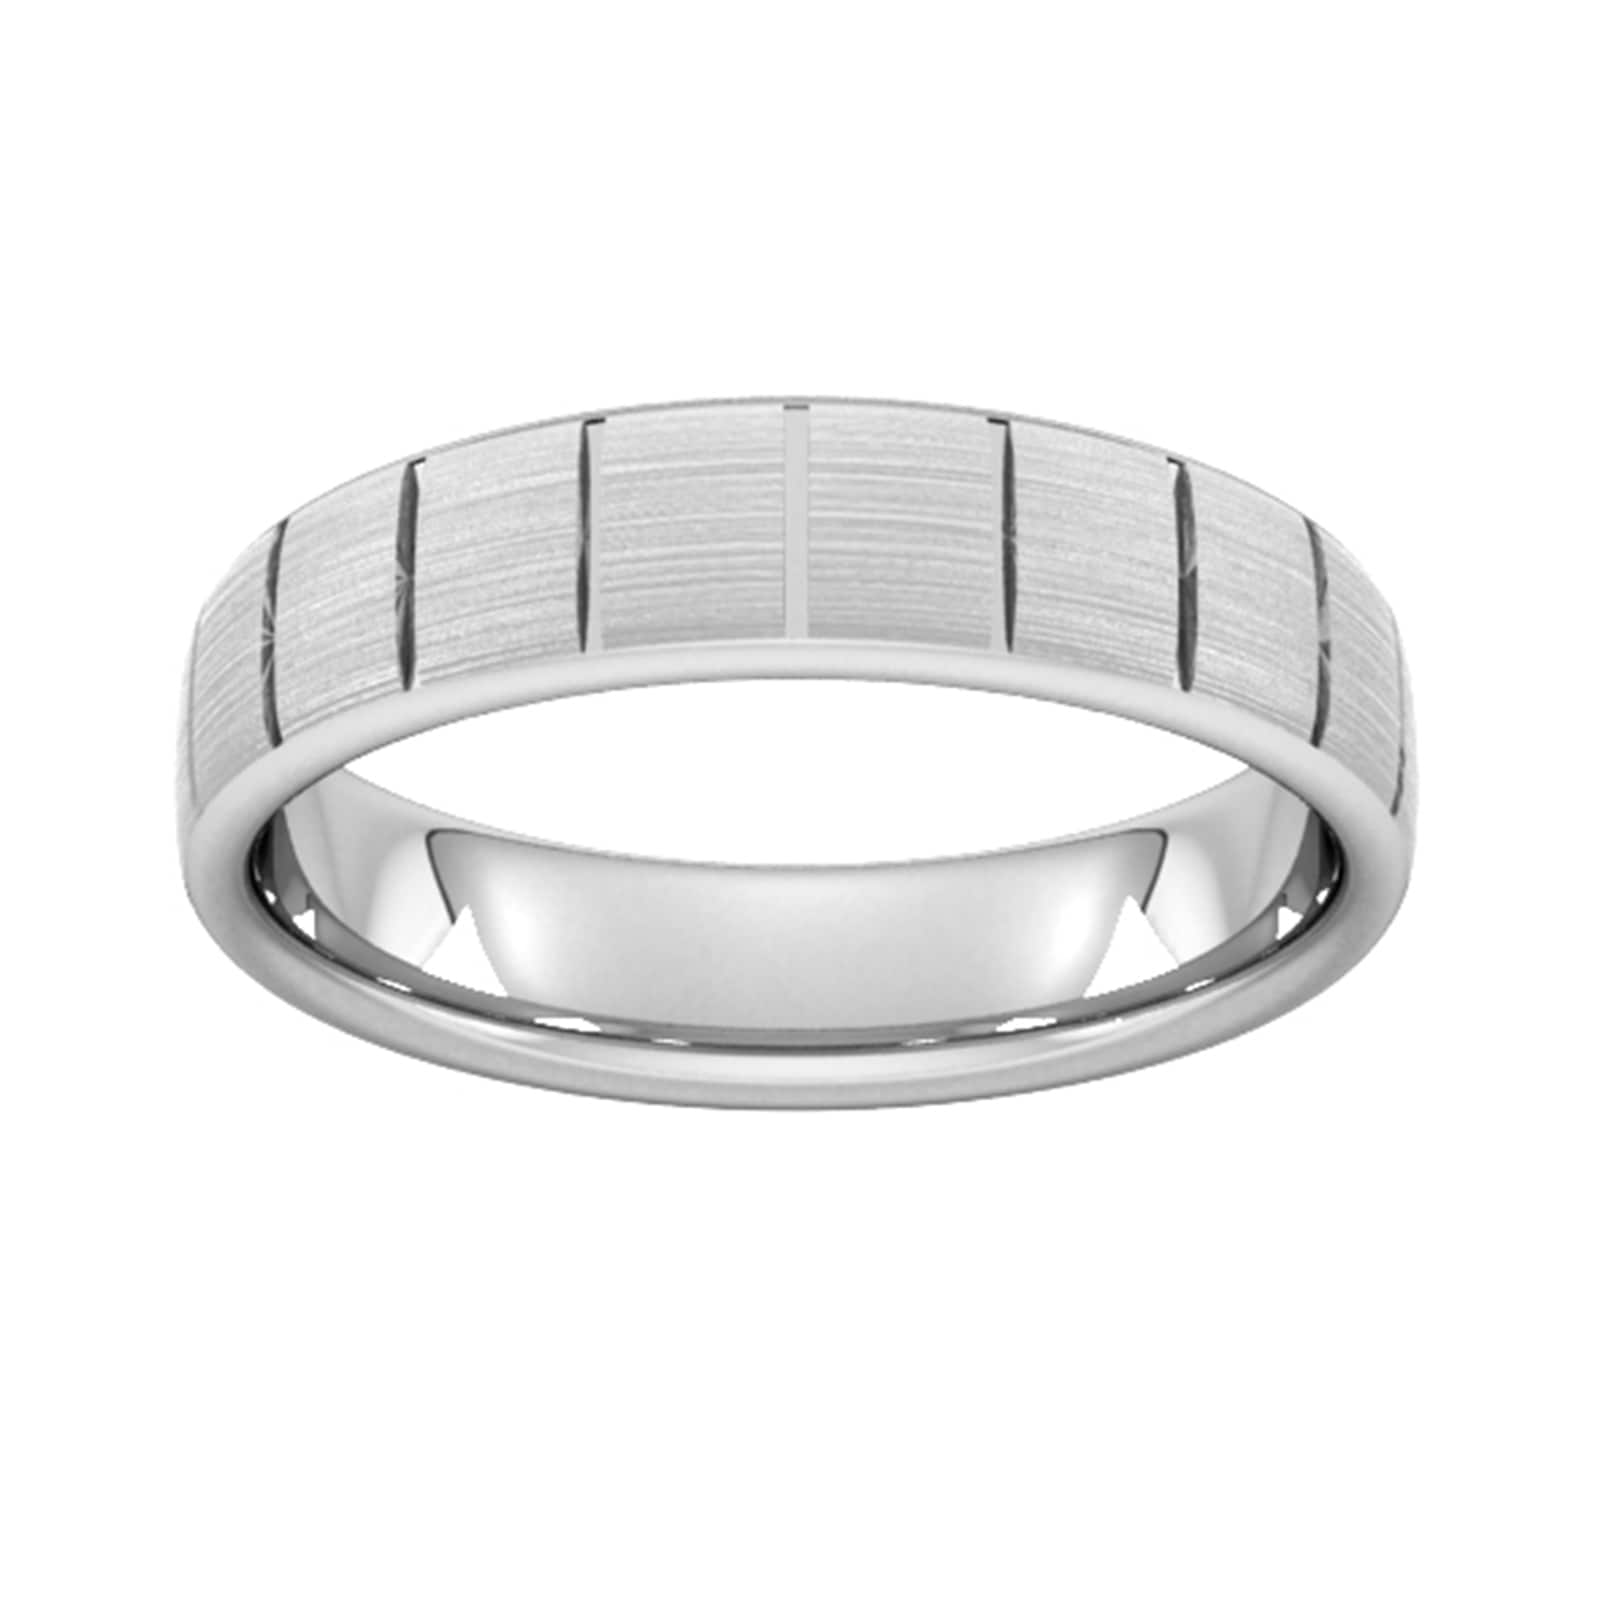 5mm D Shape Standard Vertical Lines Wedding Ring In 9 Carat White Gold - Ring Size R